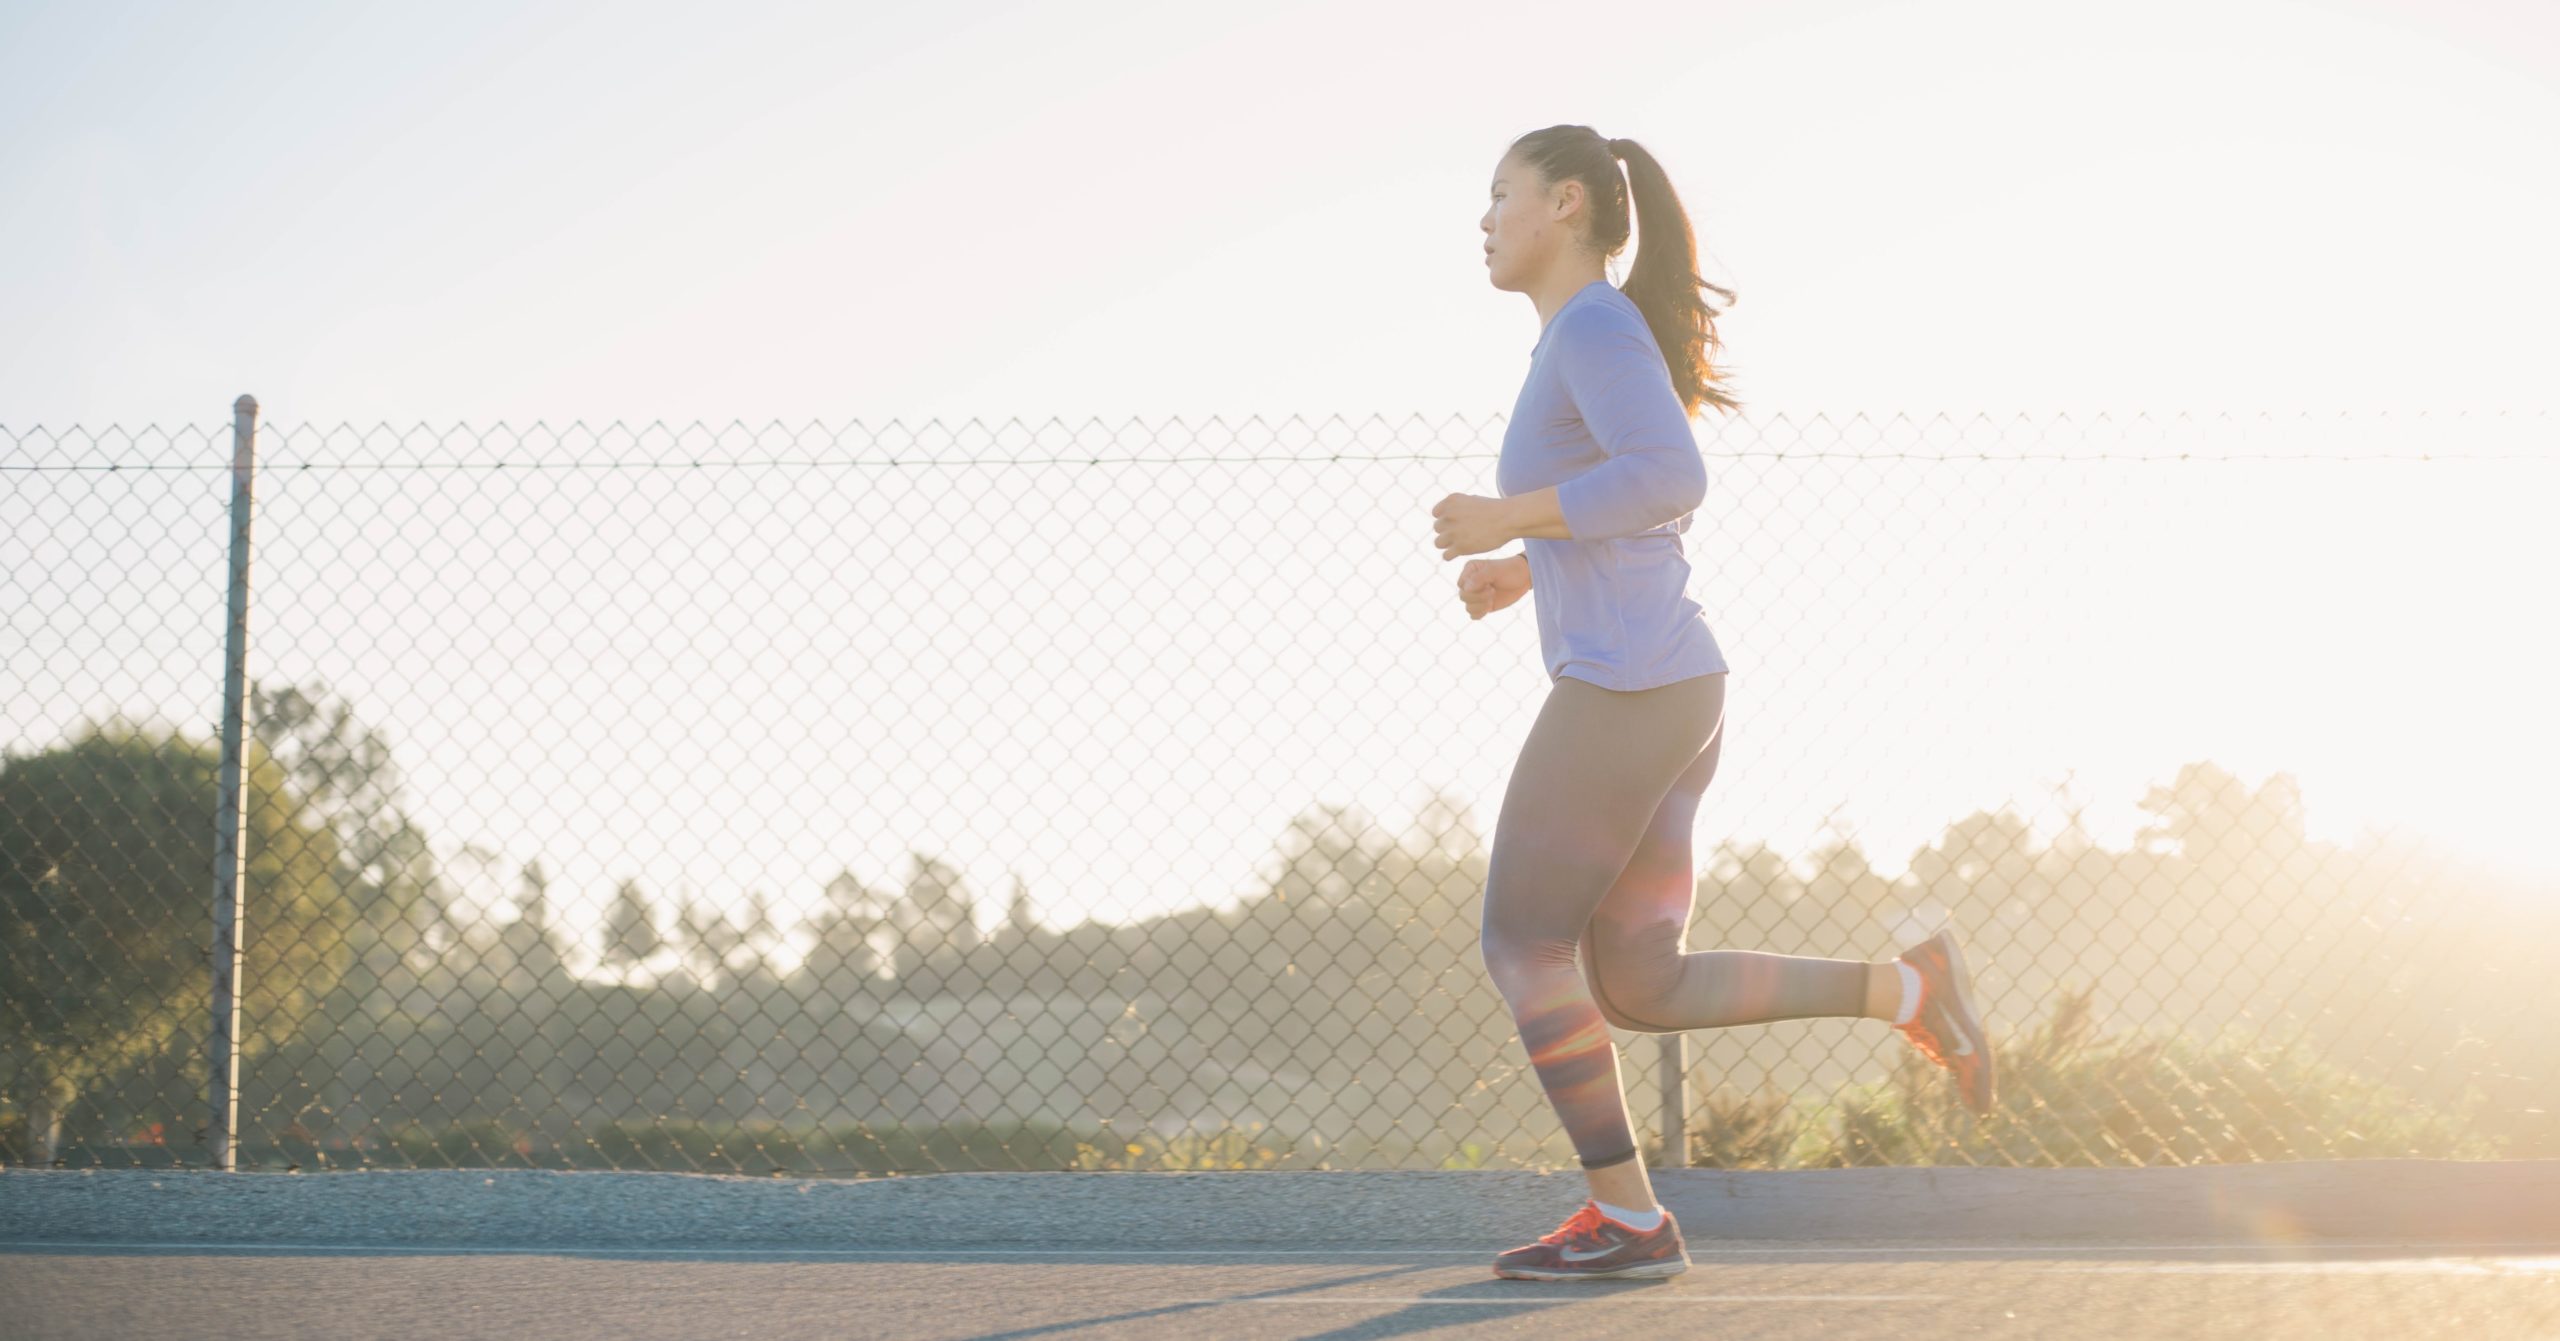 How To Start Running: A Guide for Beginners